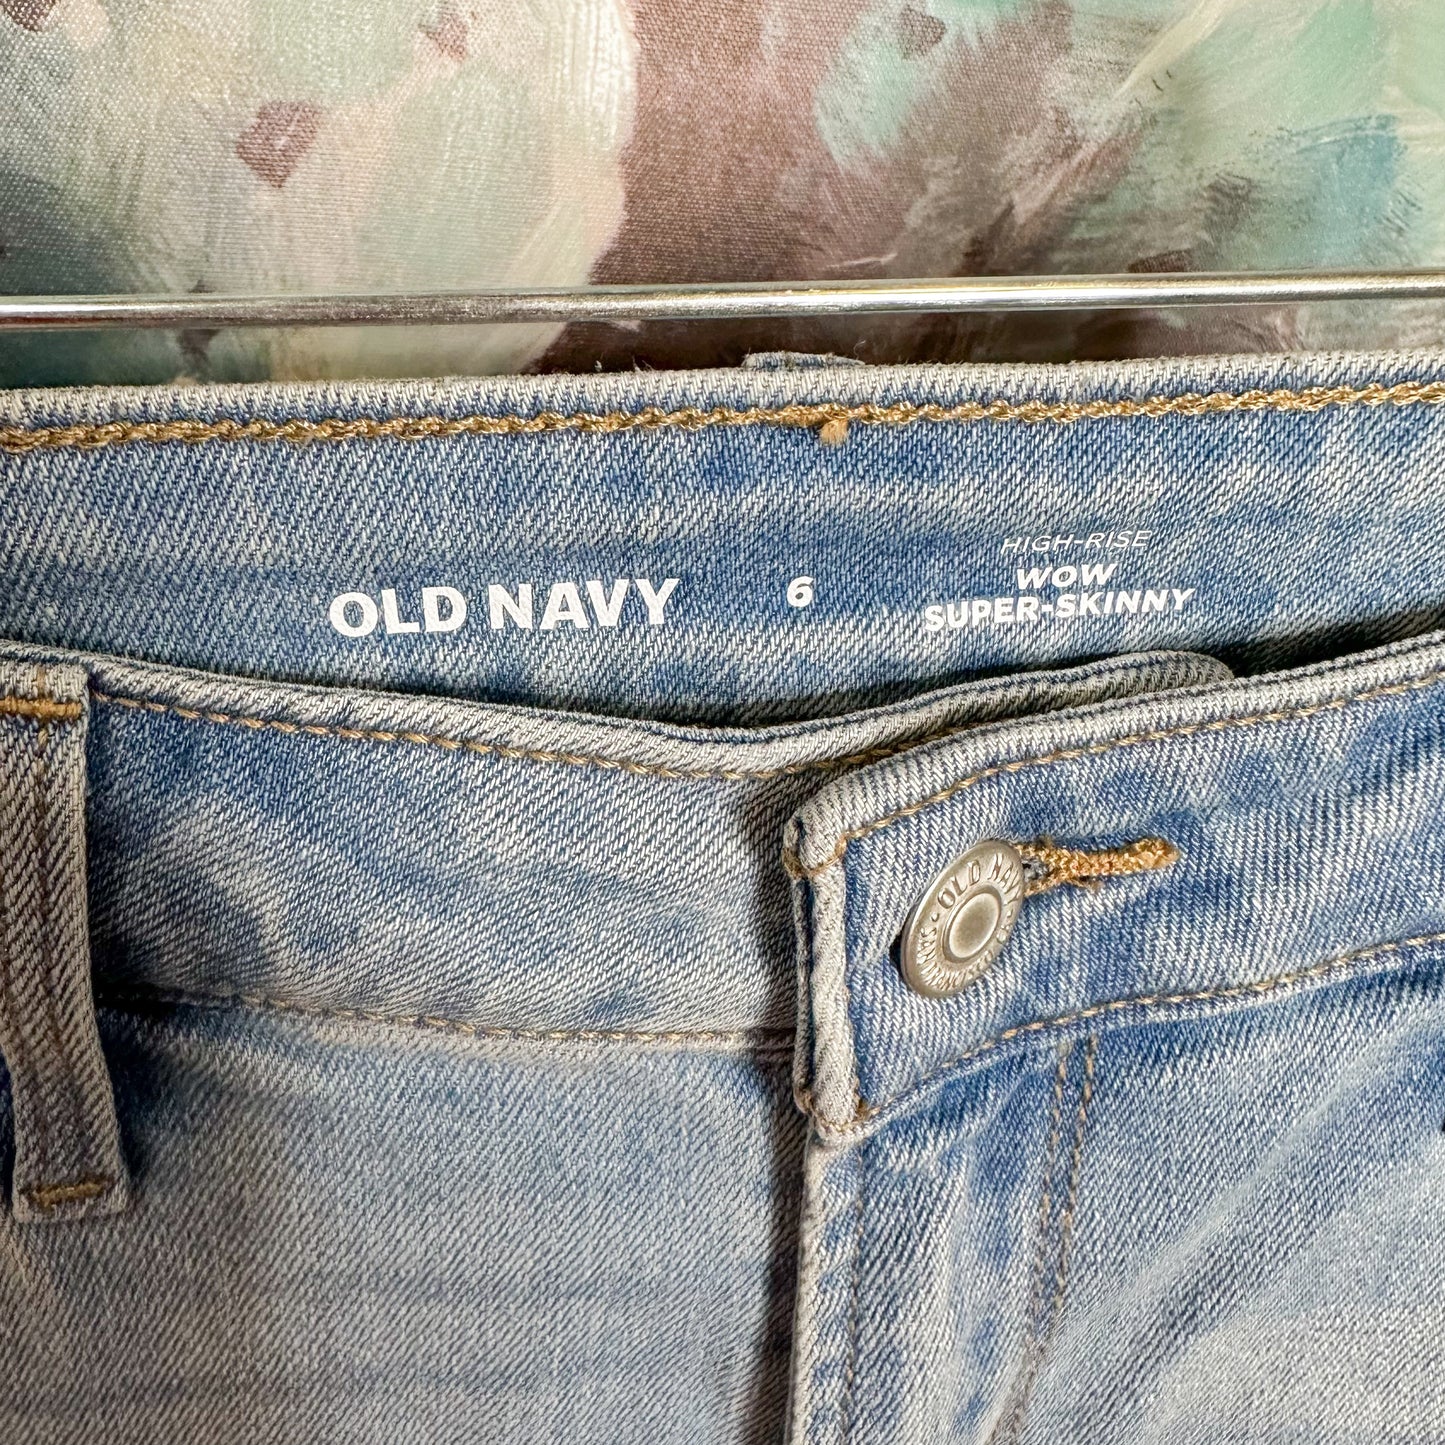 Old Navy New Wow Super Skinny High Rise Jeans Size 6